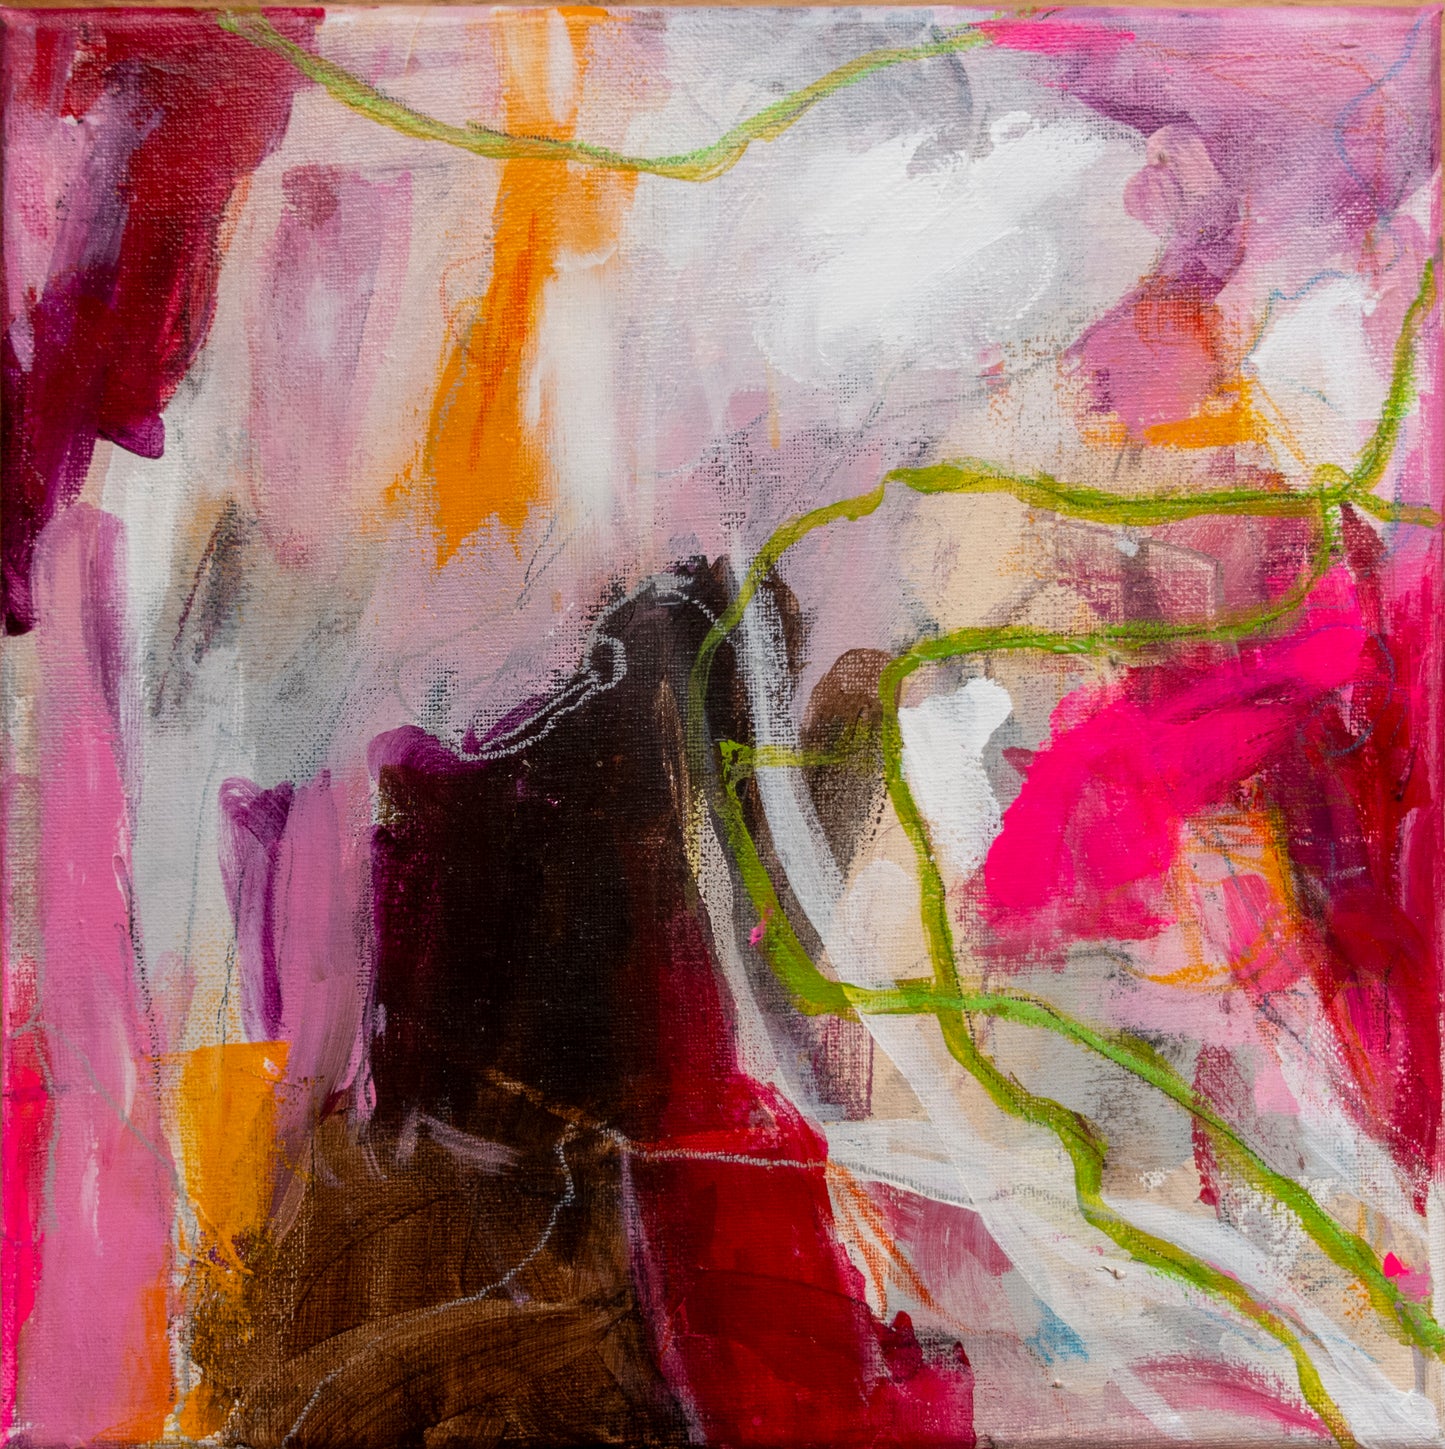 Colorful abstract painting using acrylic paint titled 'Hera' by artist Steffi Möllers; measures 12"x12"